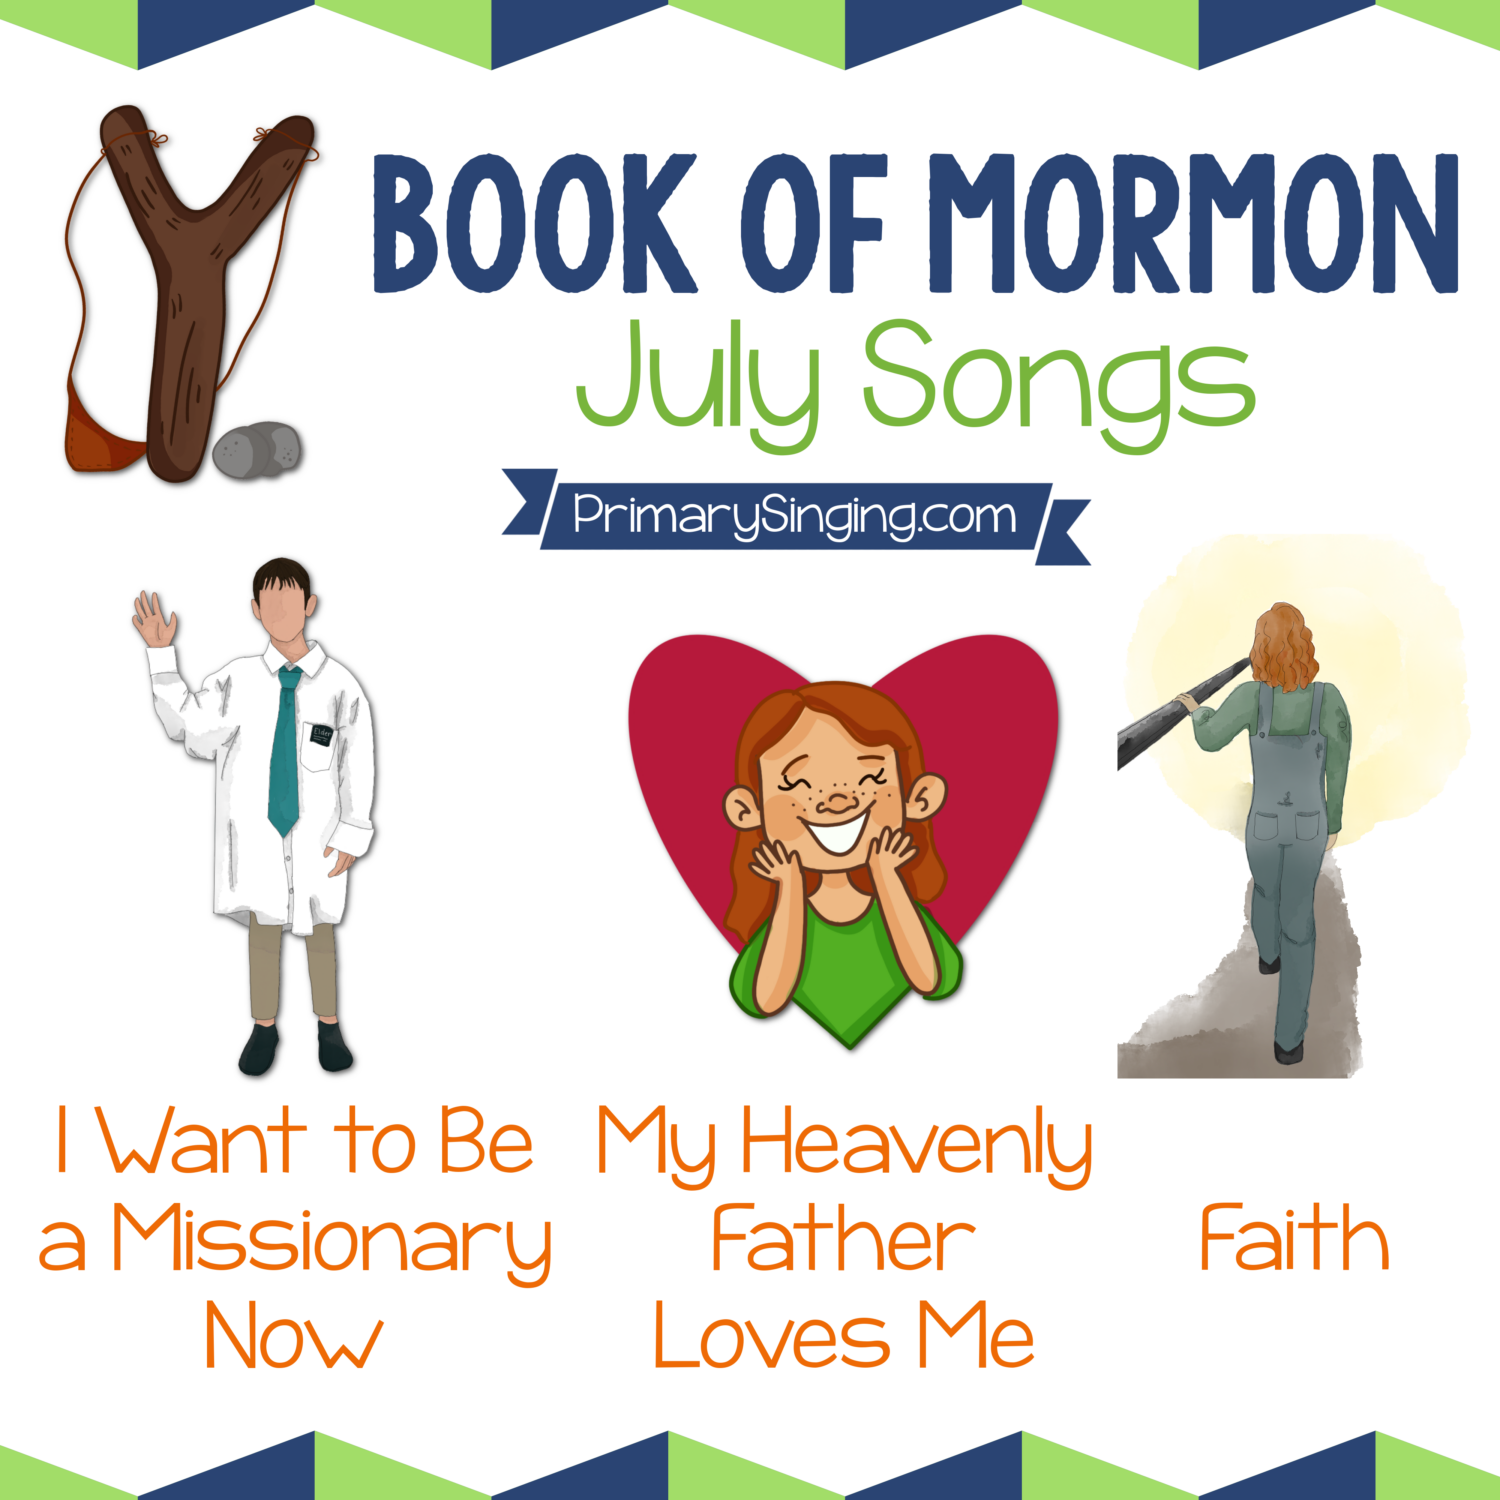 Book of Mormon July Song List - I Want to Be a Missionary Now, My Heavenly Father Loves Me, and Faith. Teach these 3 great Primary songs during Singing Time or home Come Follow Me lessons.